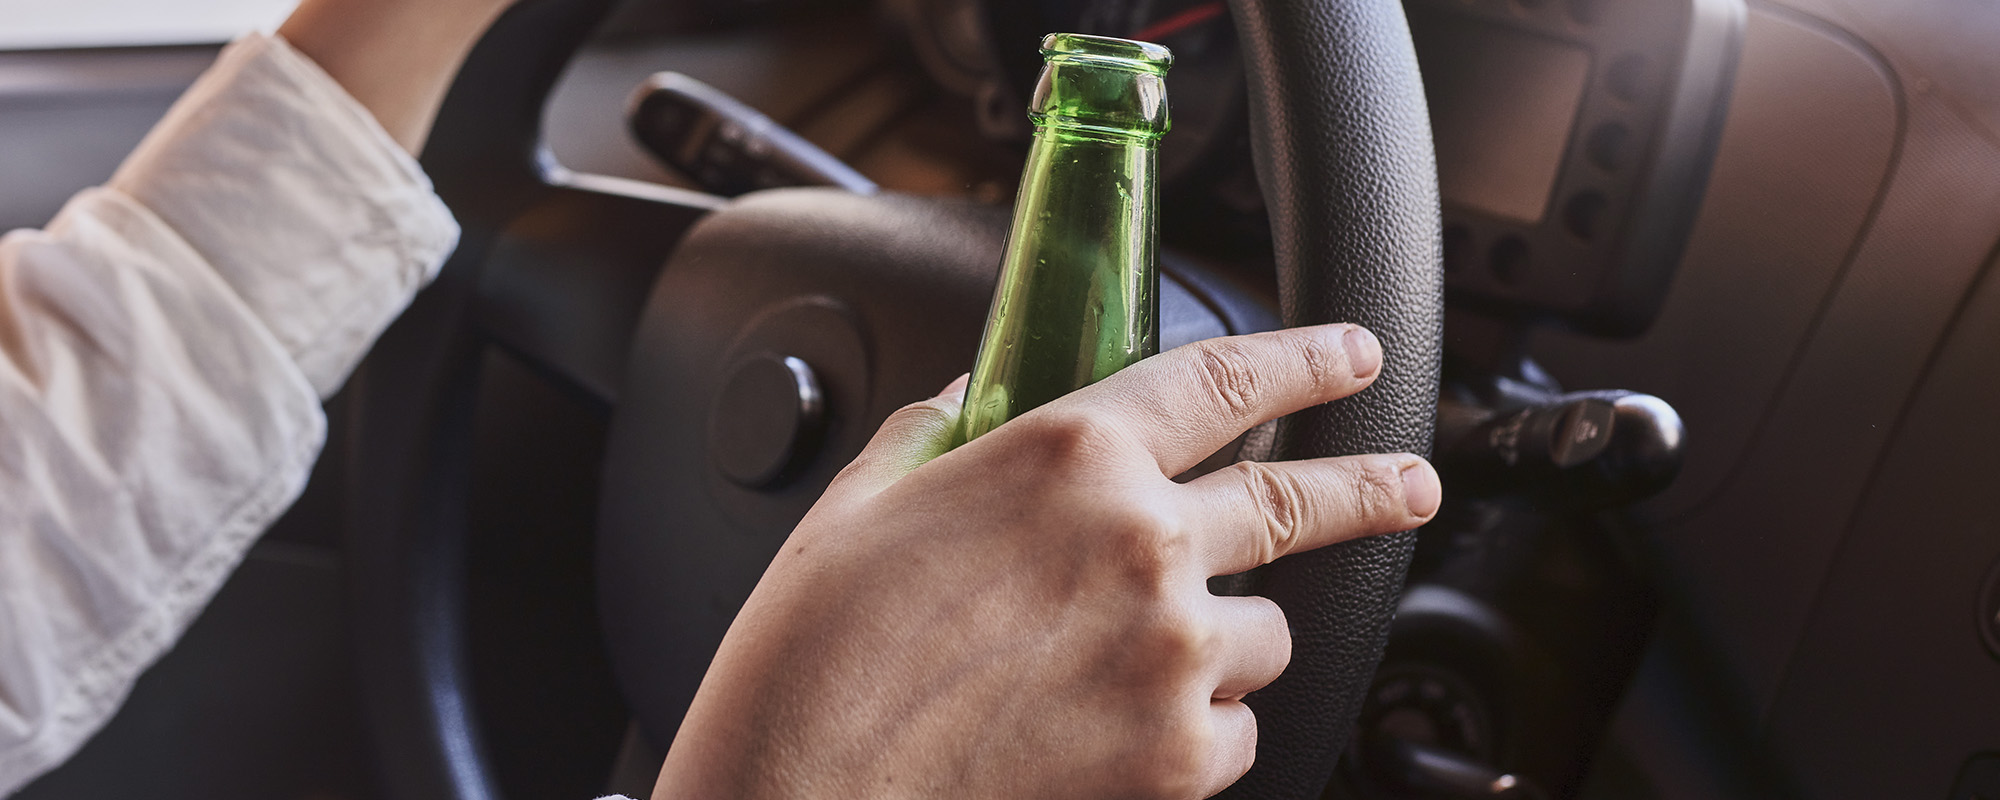 drunk driving. impaired driving